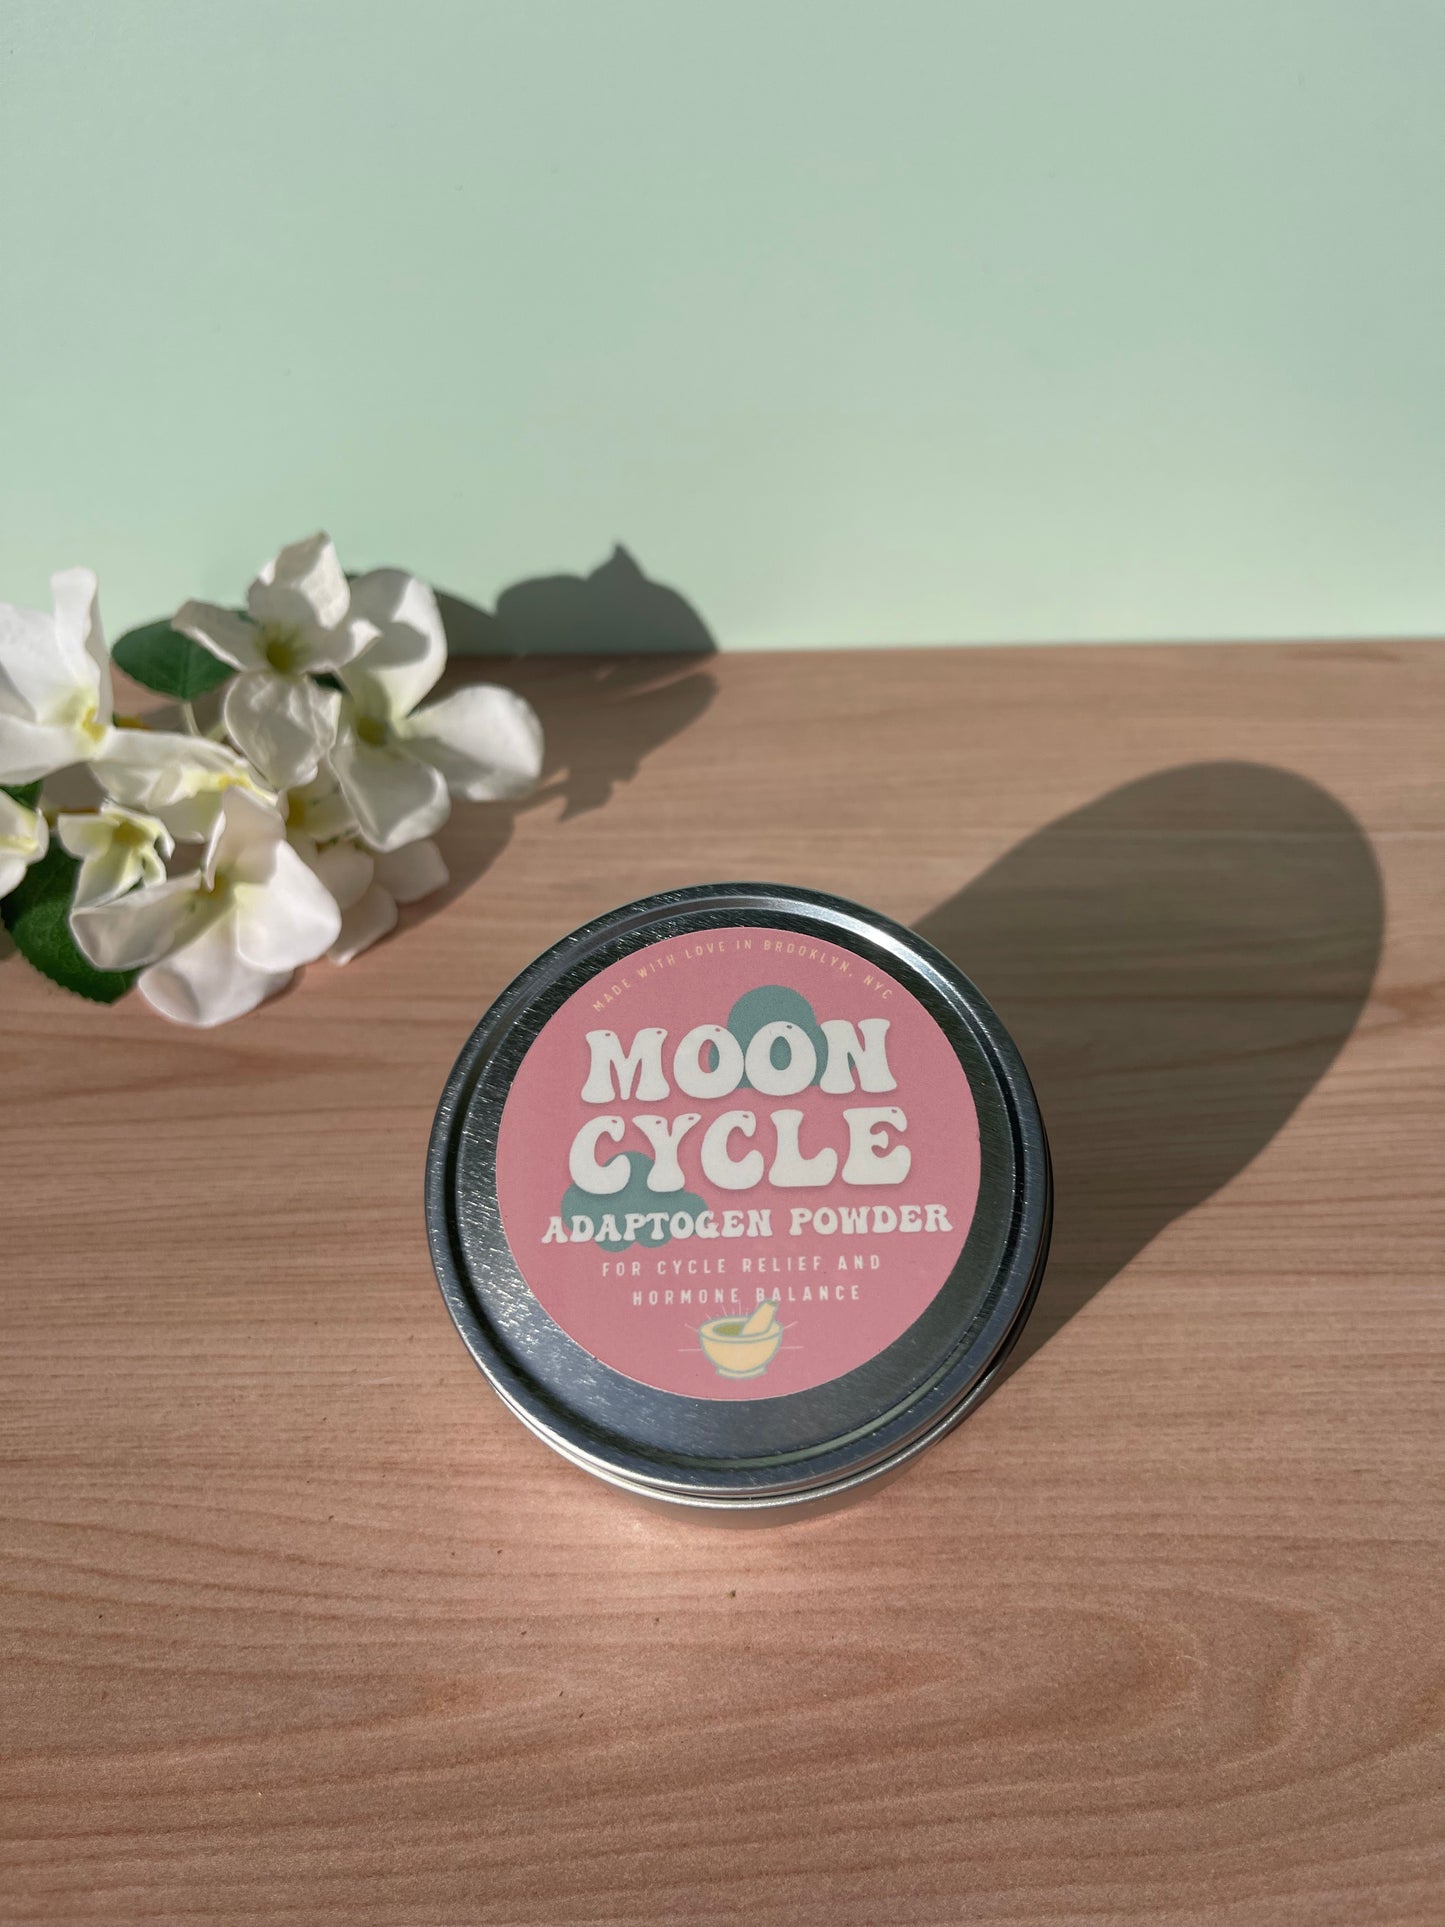 metal tin labeled moon cycle sitting on wood counter next to flowers